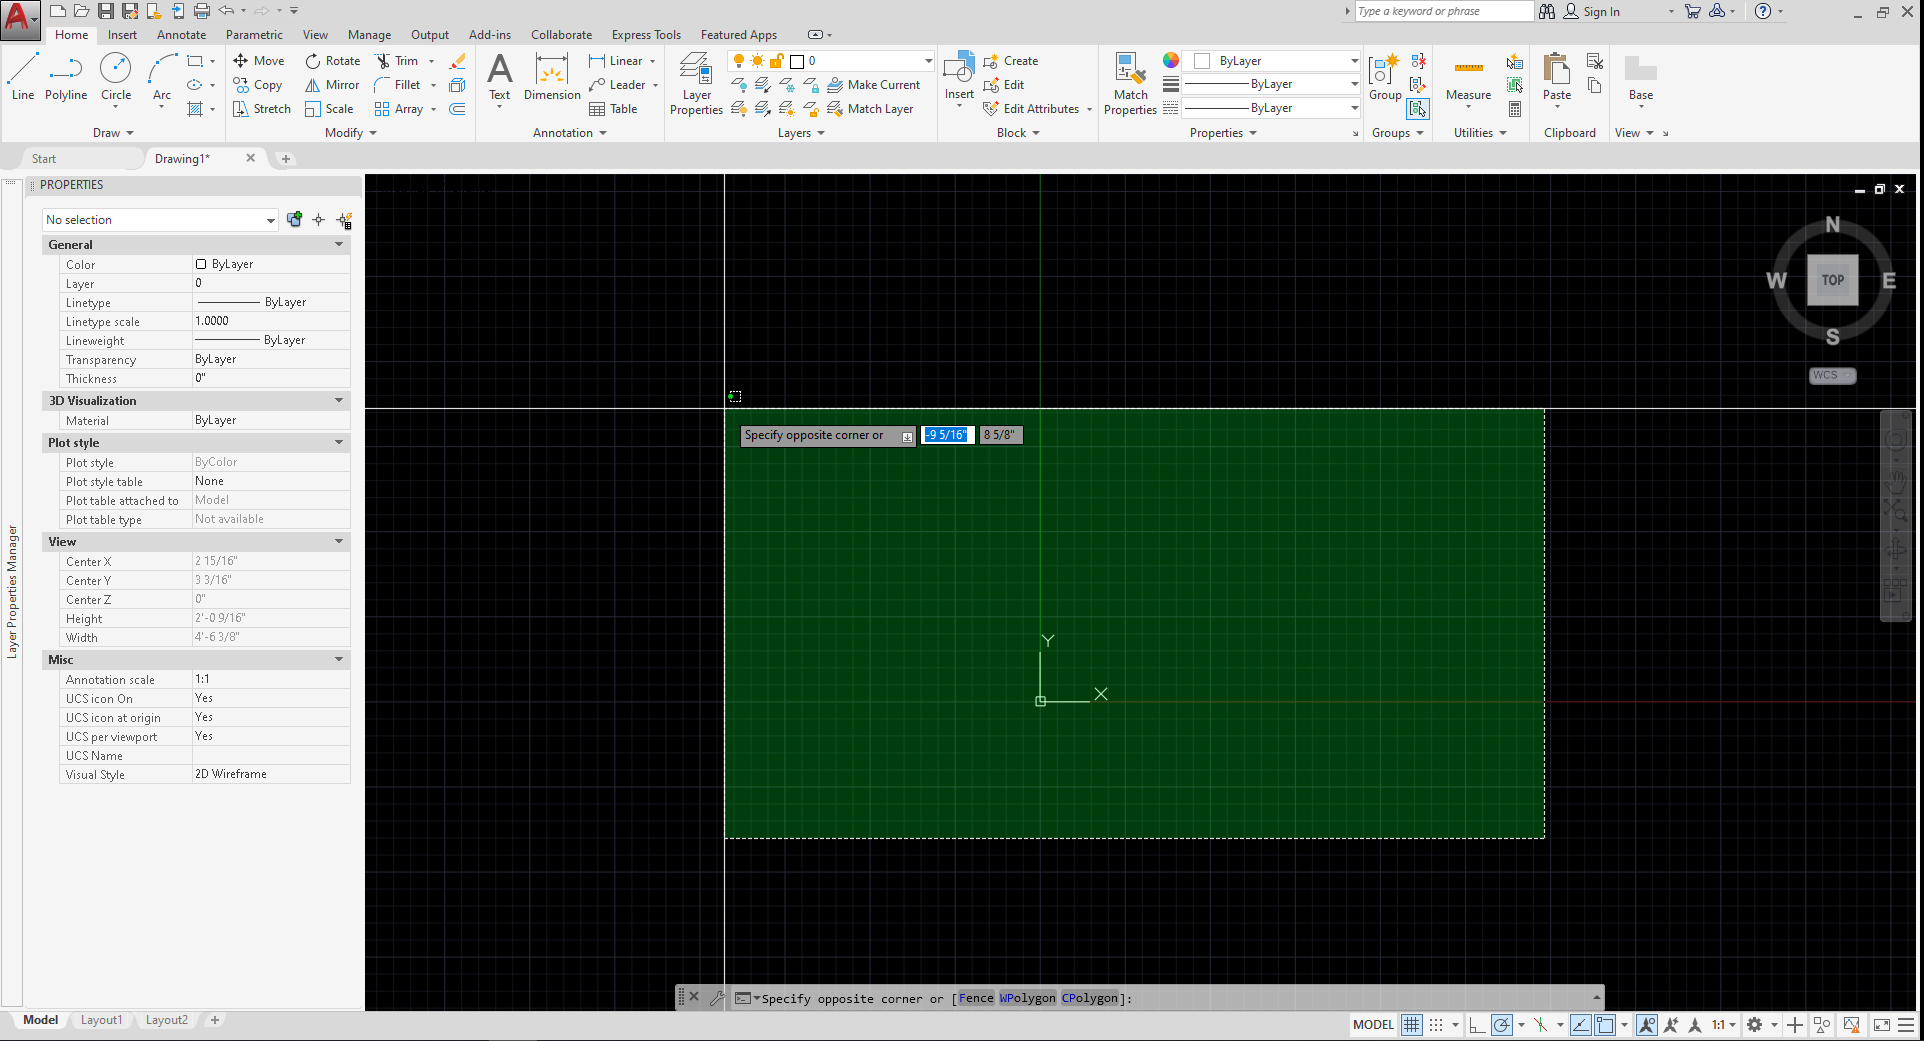 This image shows the result of cross selection on AutoCAD software. The cross selection shows in green color.